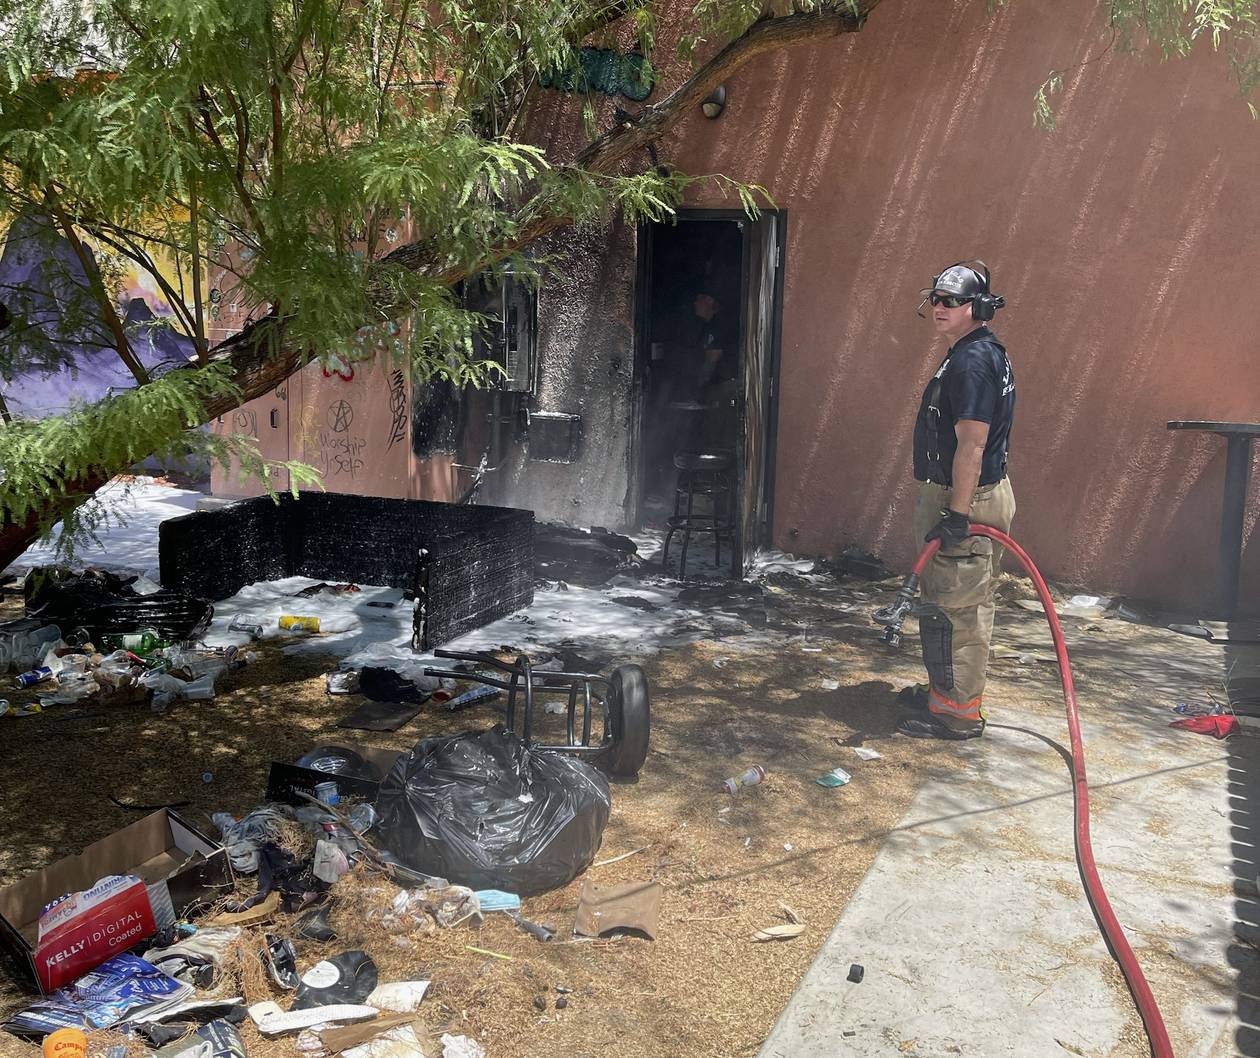 According to an eye witness, firefighters responding to the call discovered a homeless encampment inside the music venue, which has been closed since the pandemic hit in March 2020.